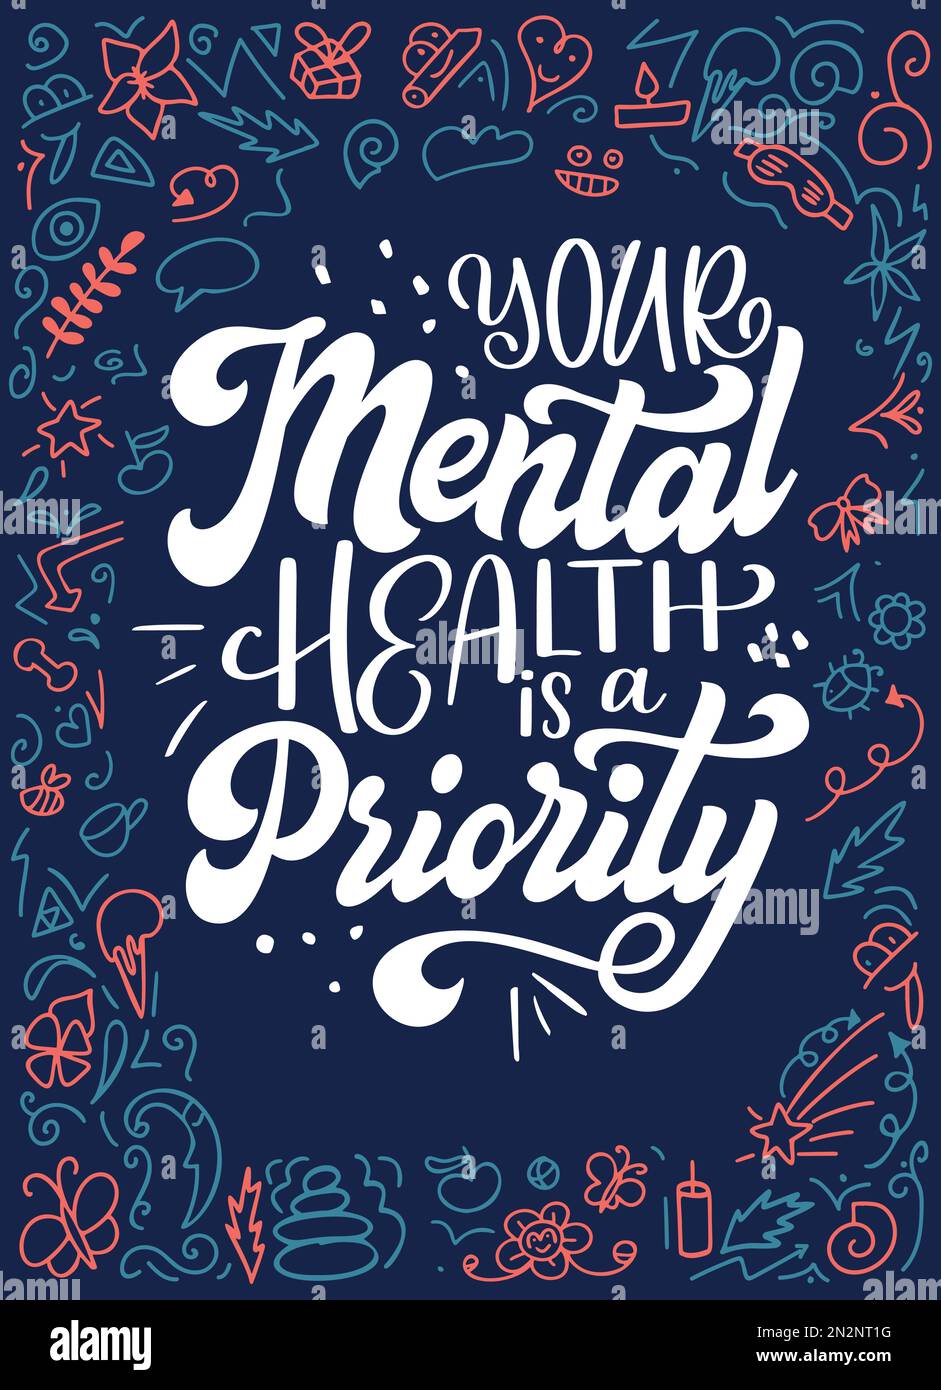 Self care mental heath quote in hand drawn lettering. Unique inspirational text slogan for print, poster, coaching. Vector illustration Stock Vector